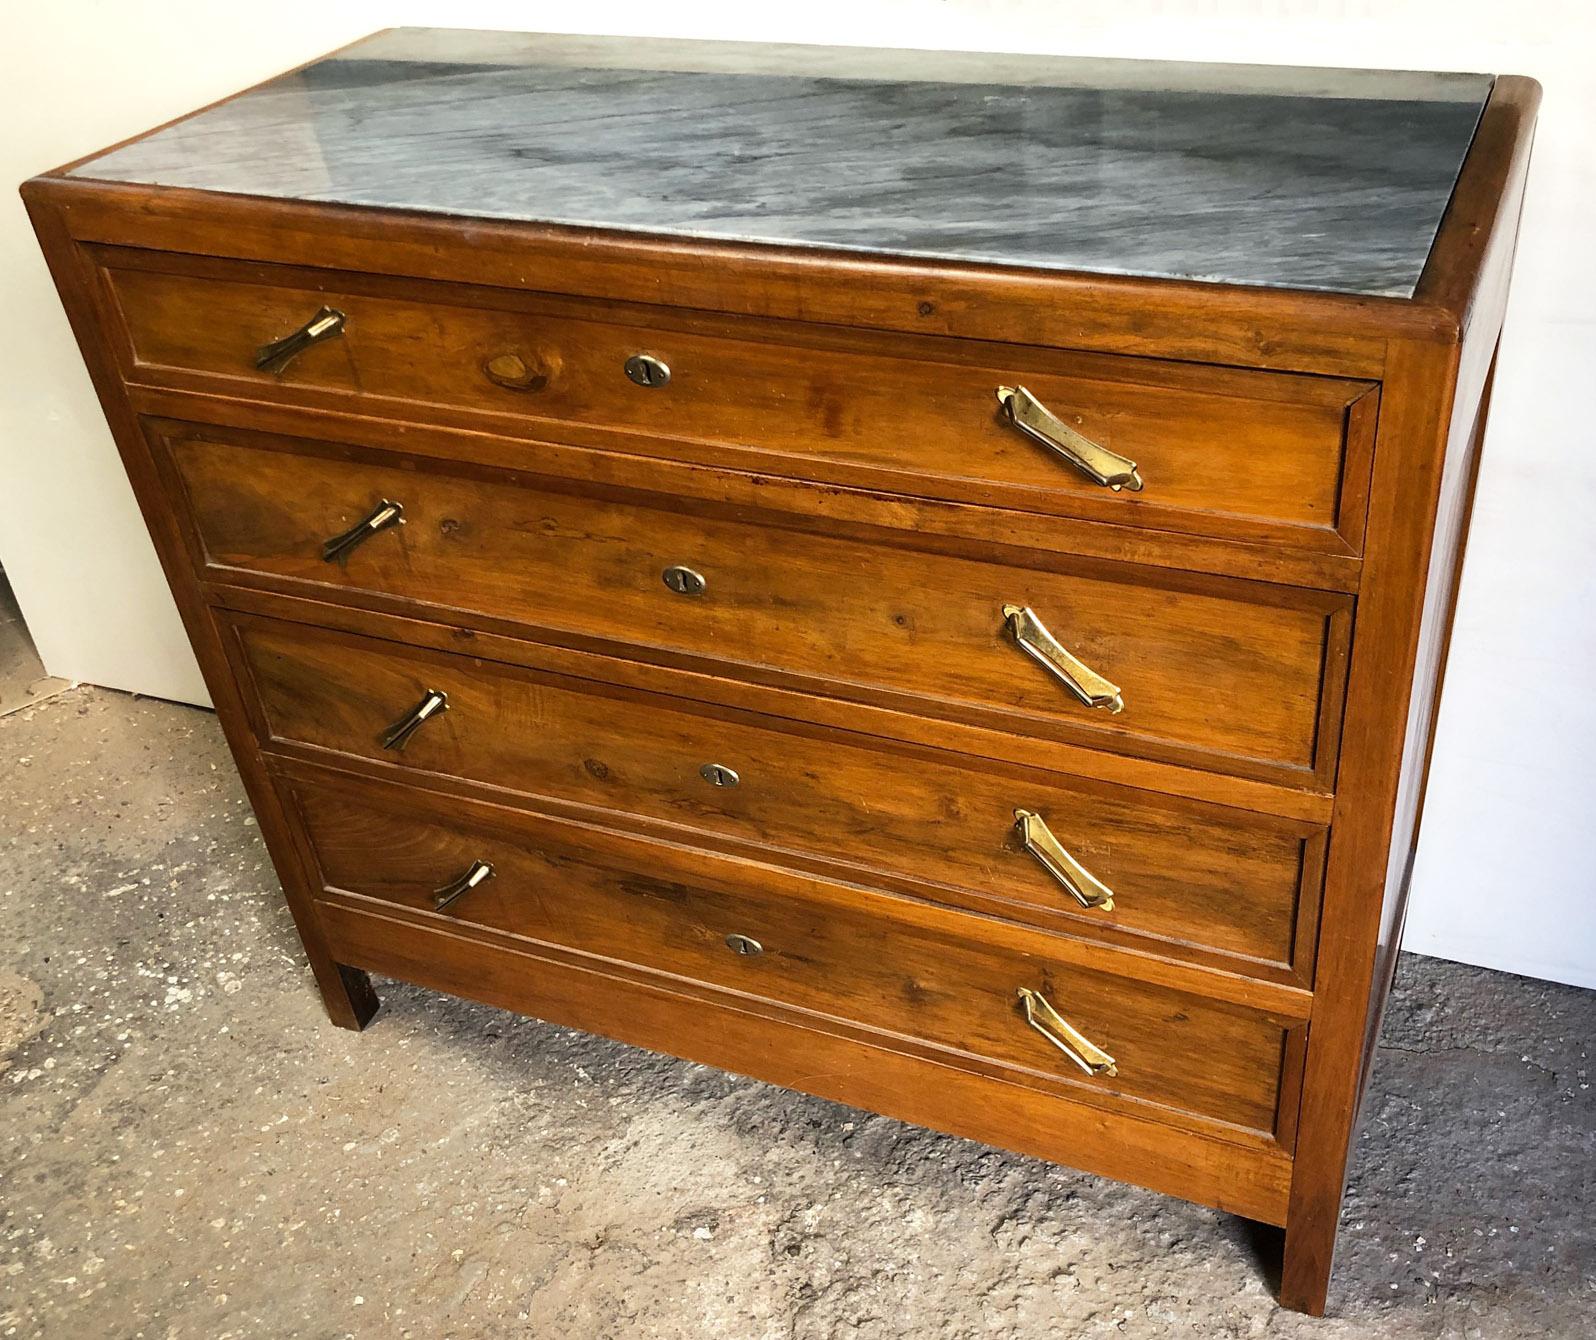 Italian walnut chest of drawers, original from 1950, with gray marble, with 4 drawers, very sturdy.
Coming from a Florentine country villa.
This is a very useful and capacious piece of furniture, which can be easily placed both at the entrance and